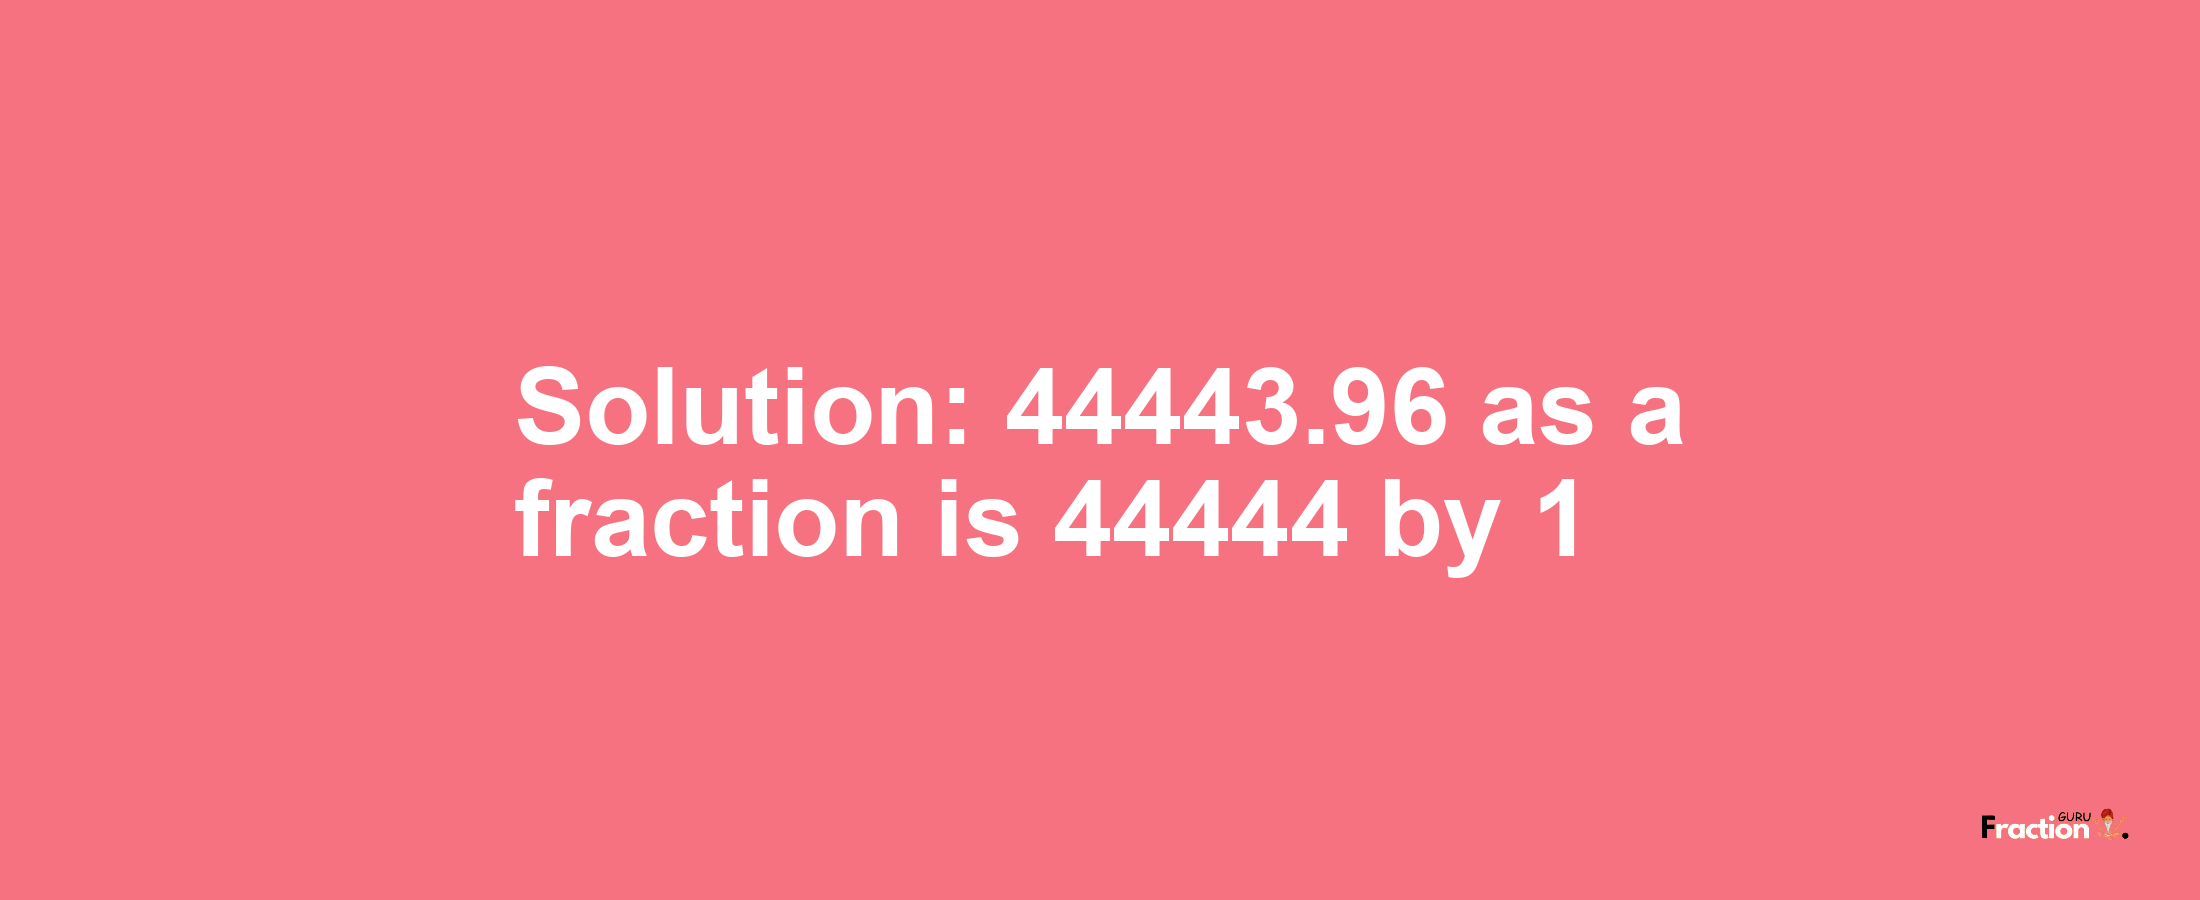 Solution:44443.96 as a fraction is 44444/1